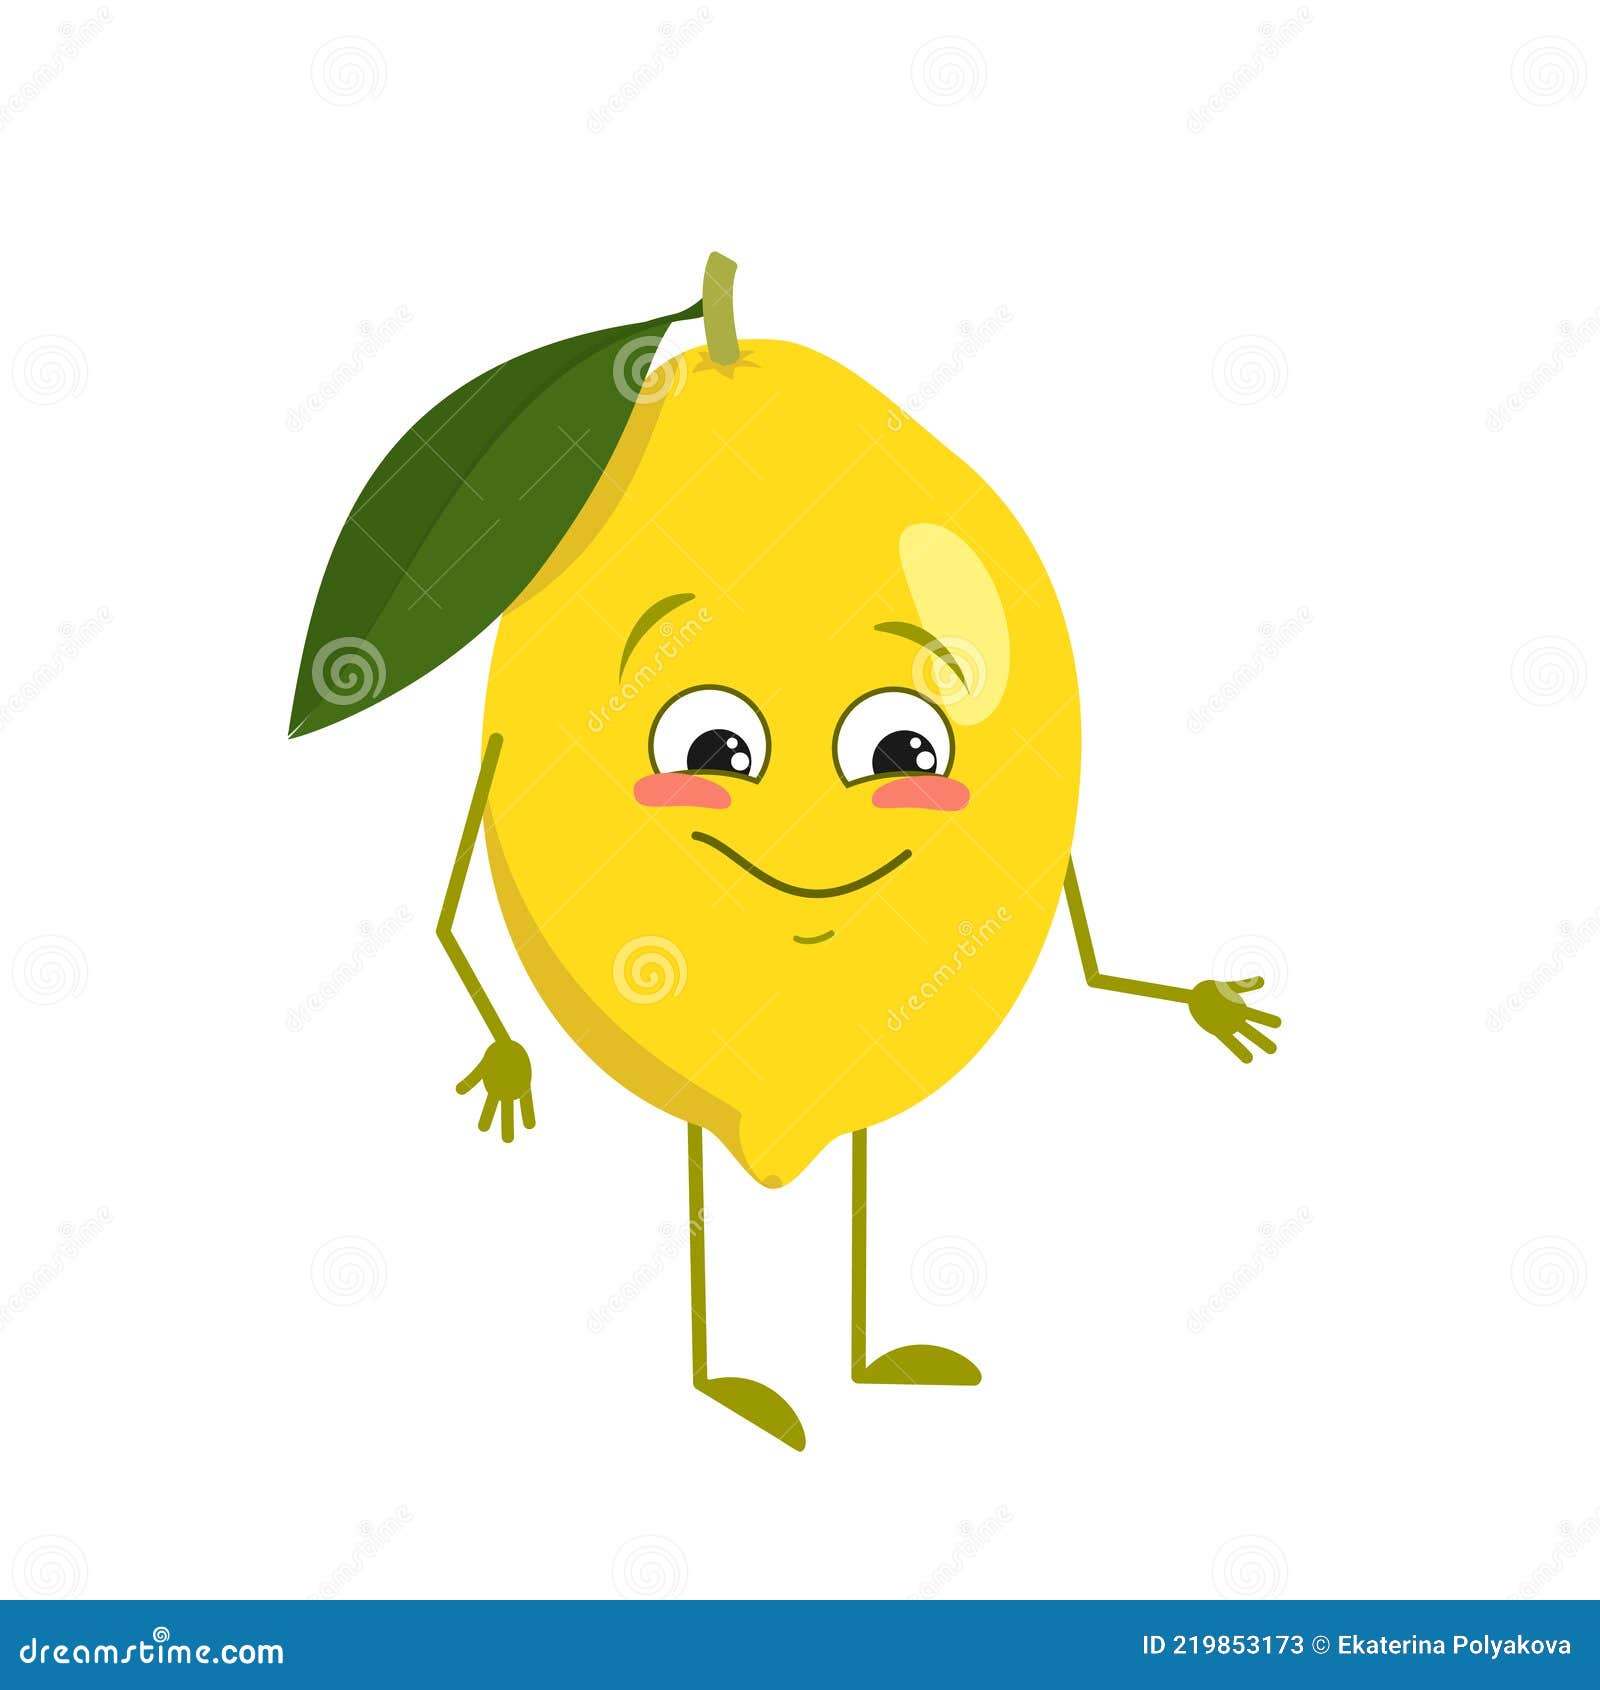 Cute Lemon Character with Joy Emotions, Smiling Face, Happy Eyes, Arms ...